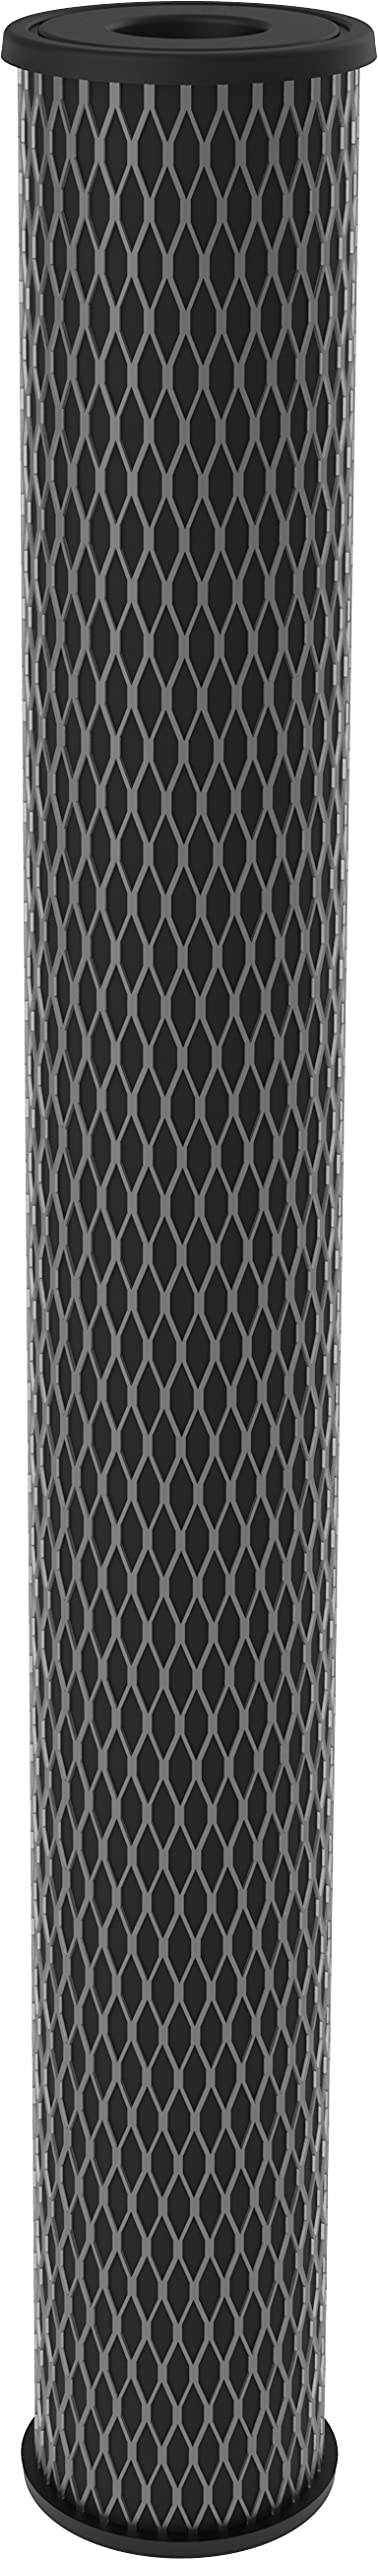 Pentair Pentek C1-20 Carbon Water Filter, 20-Inch, Whole House Dual Purpose Powered Activated Carbon Cartridge Filter, 20" x 2.5", 5 Micron 20" x 2.5" - NewNest Australia